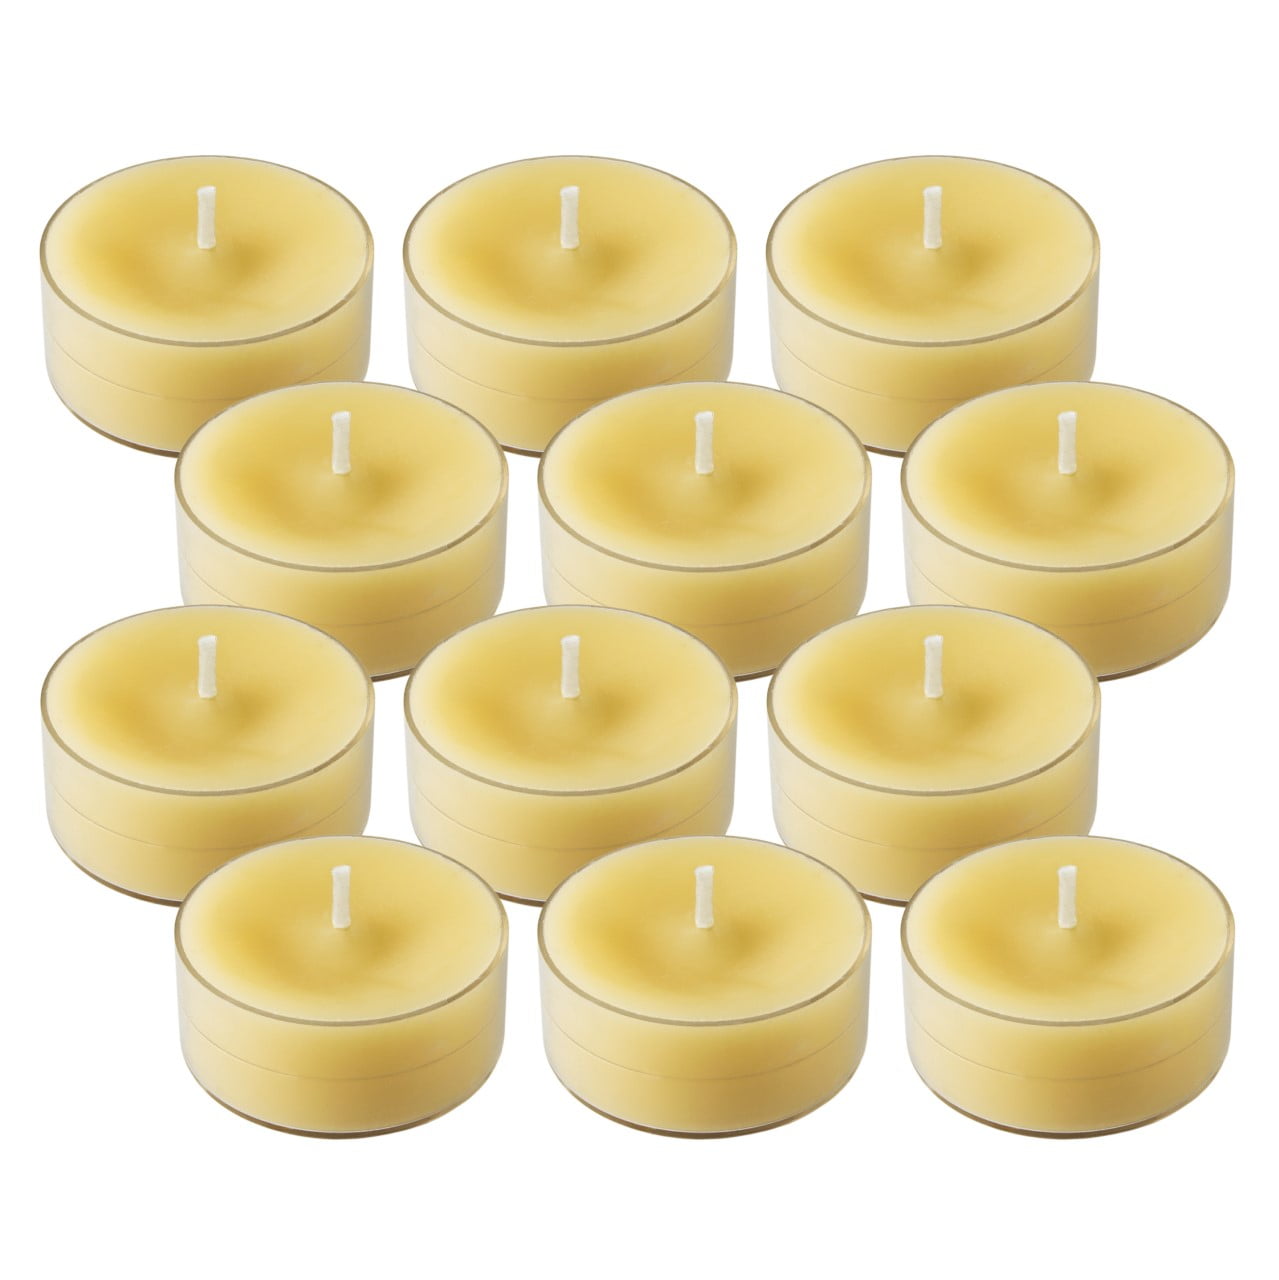 pure Beeswax Candles Buddha monk decorative candles holiday gift